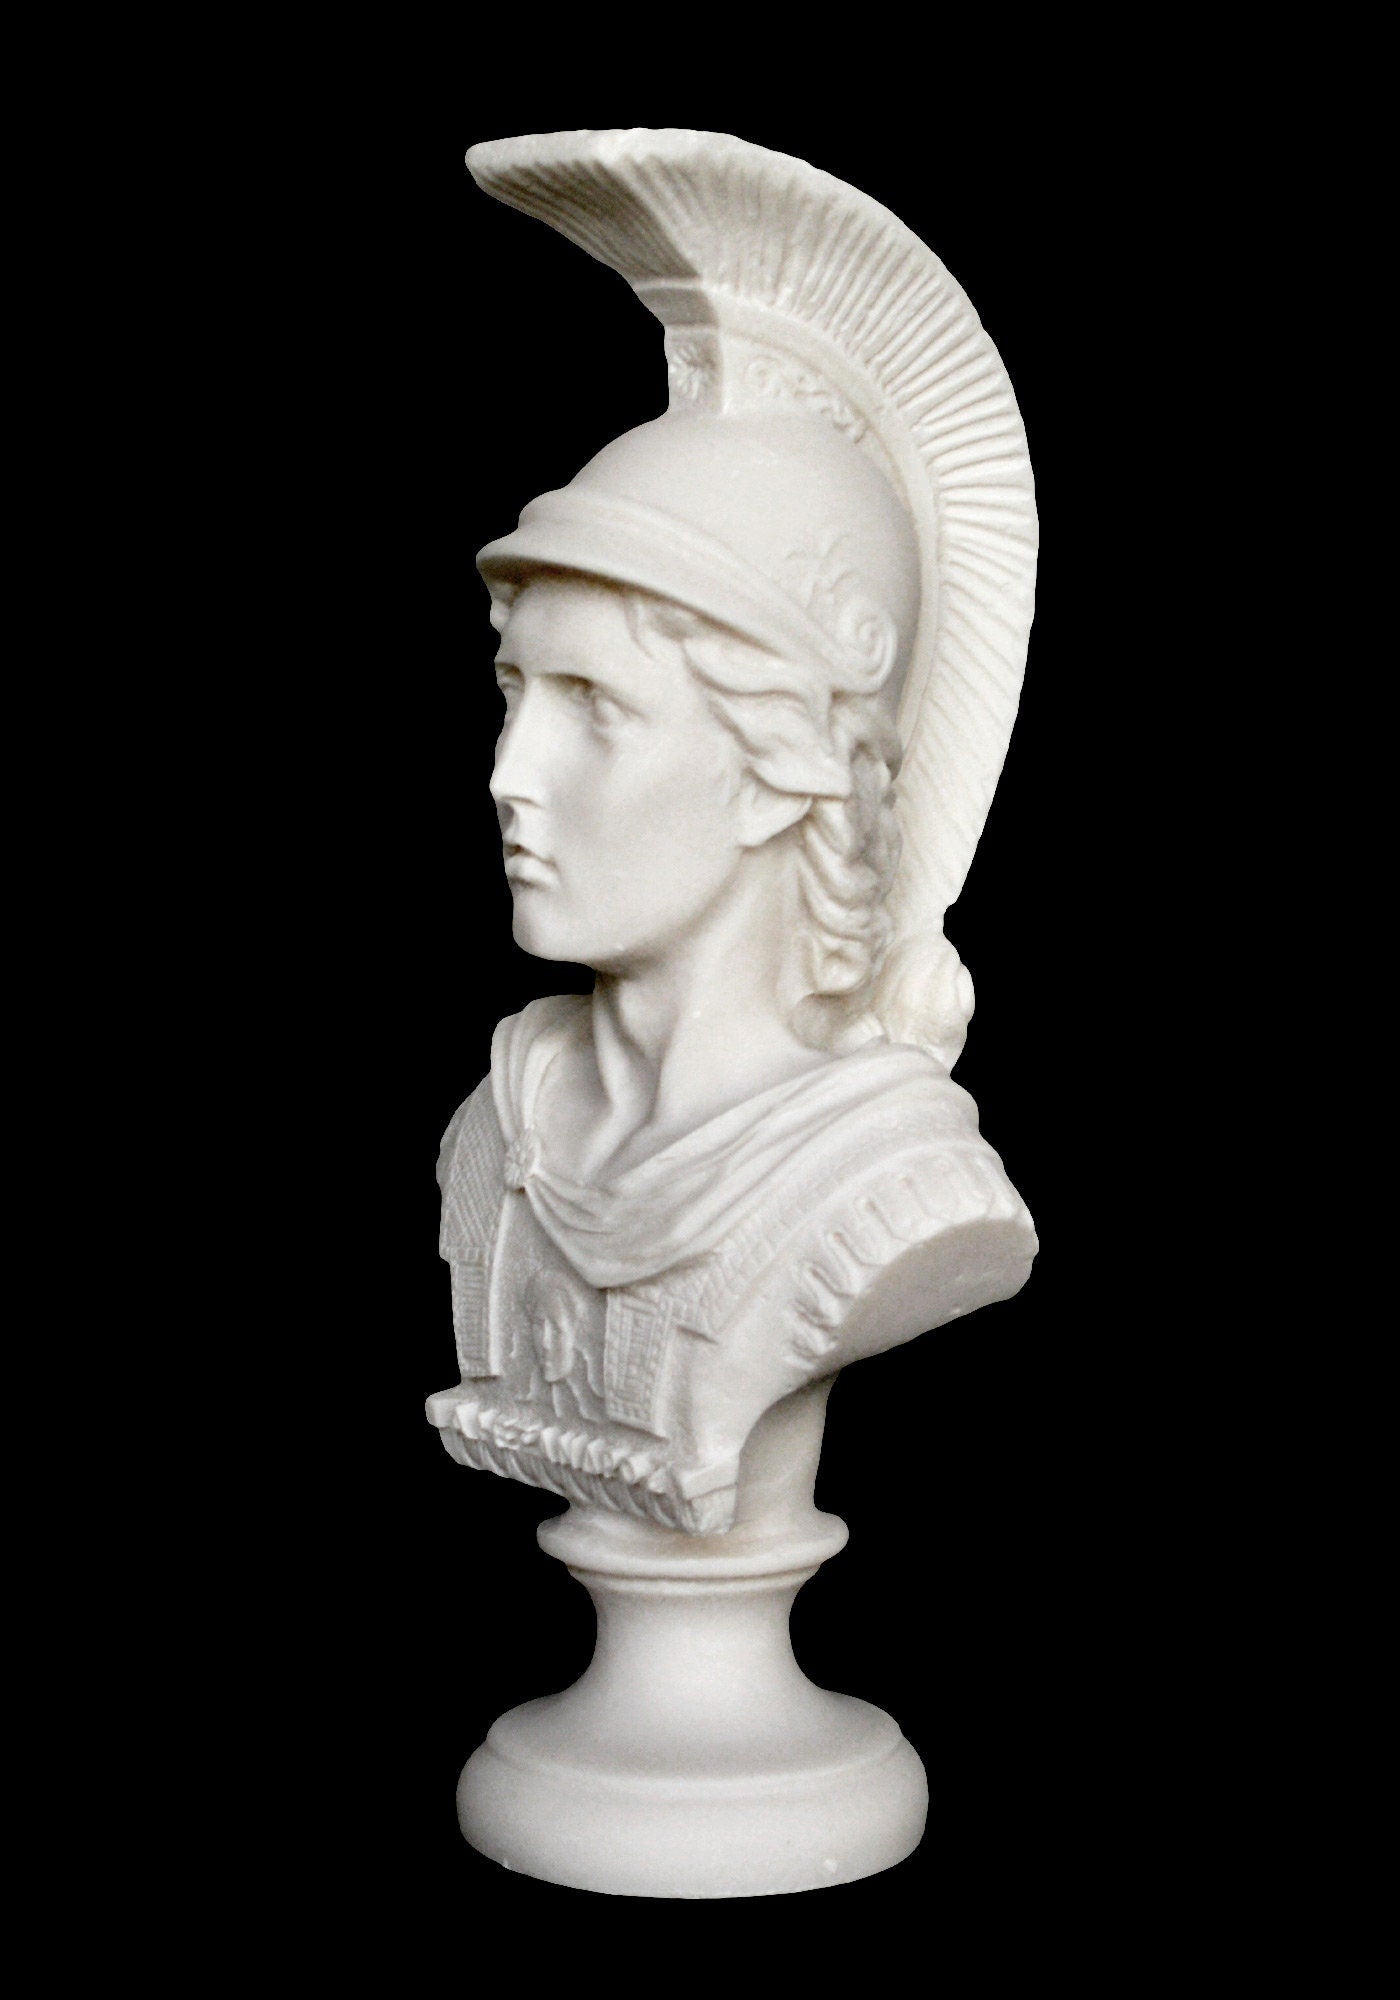 Alexander the Great Bust  - King of Macedonia - 356–323 BC - Son of Philip - Visionary Leader - Student of Aristotle - Alabaster Statue